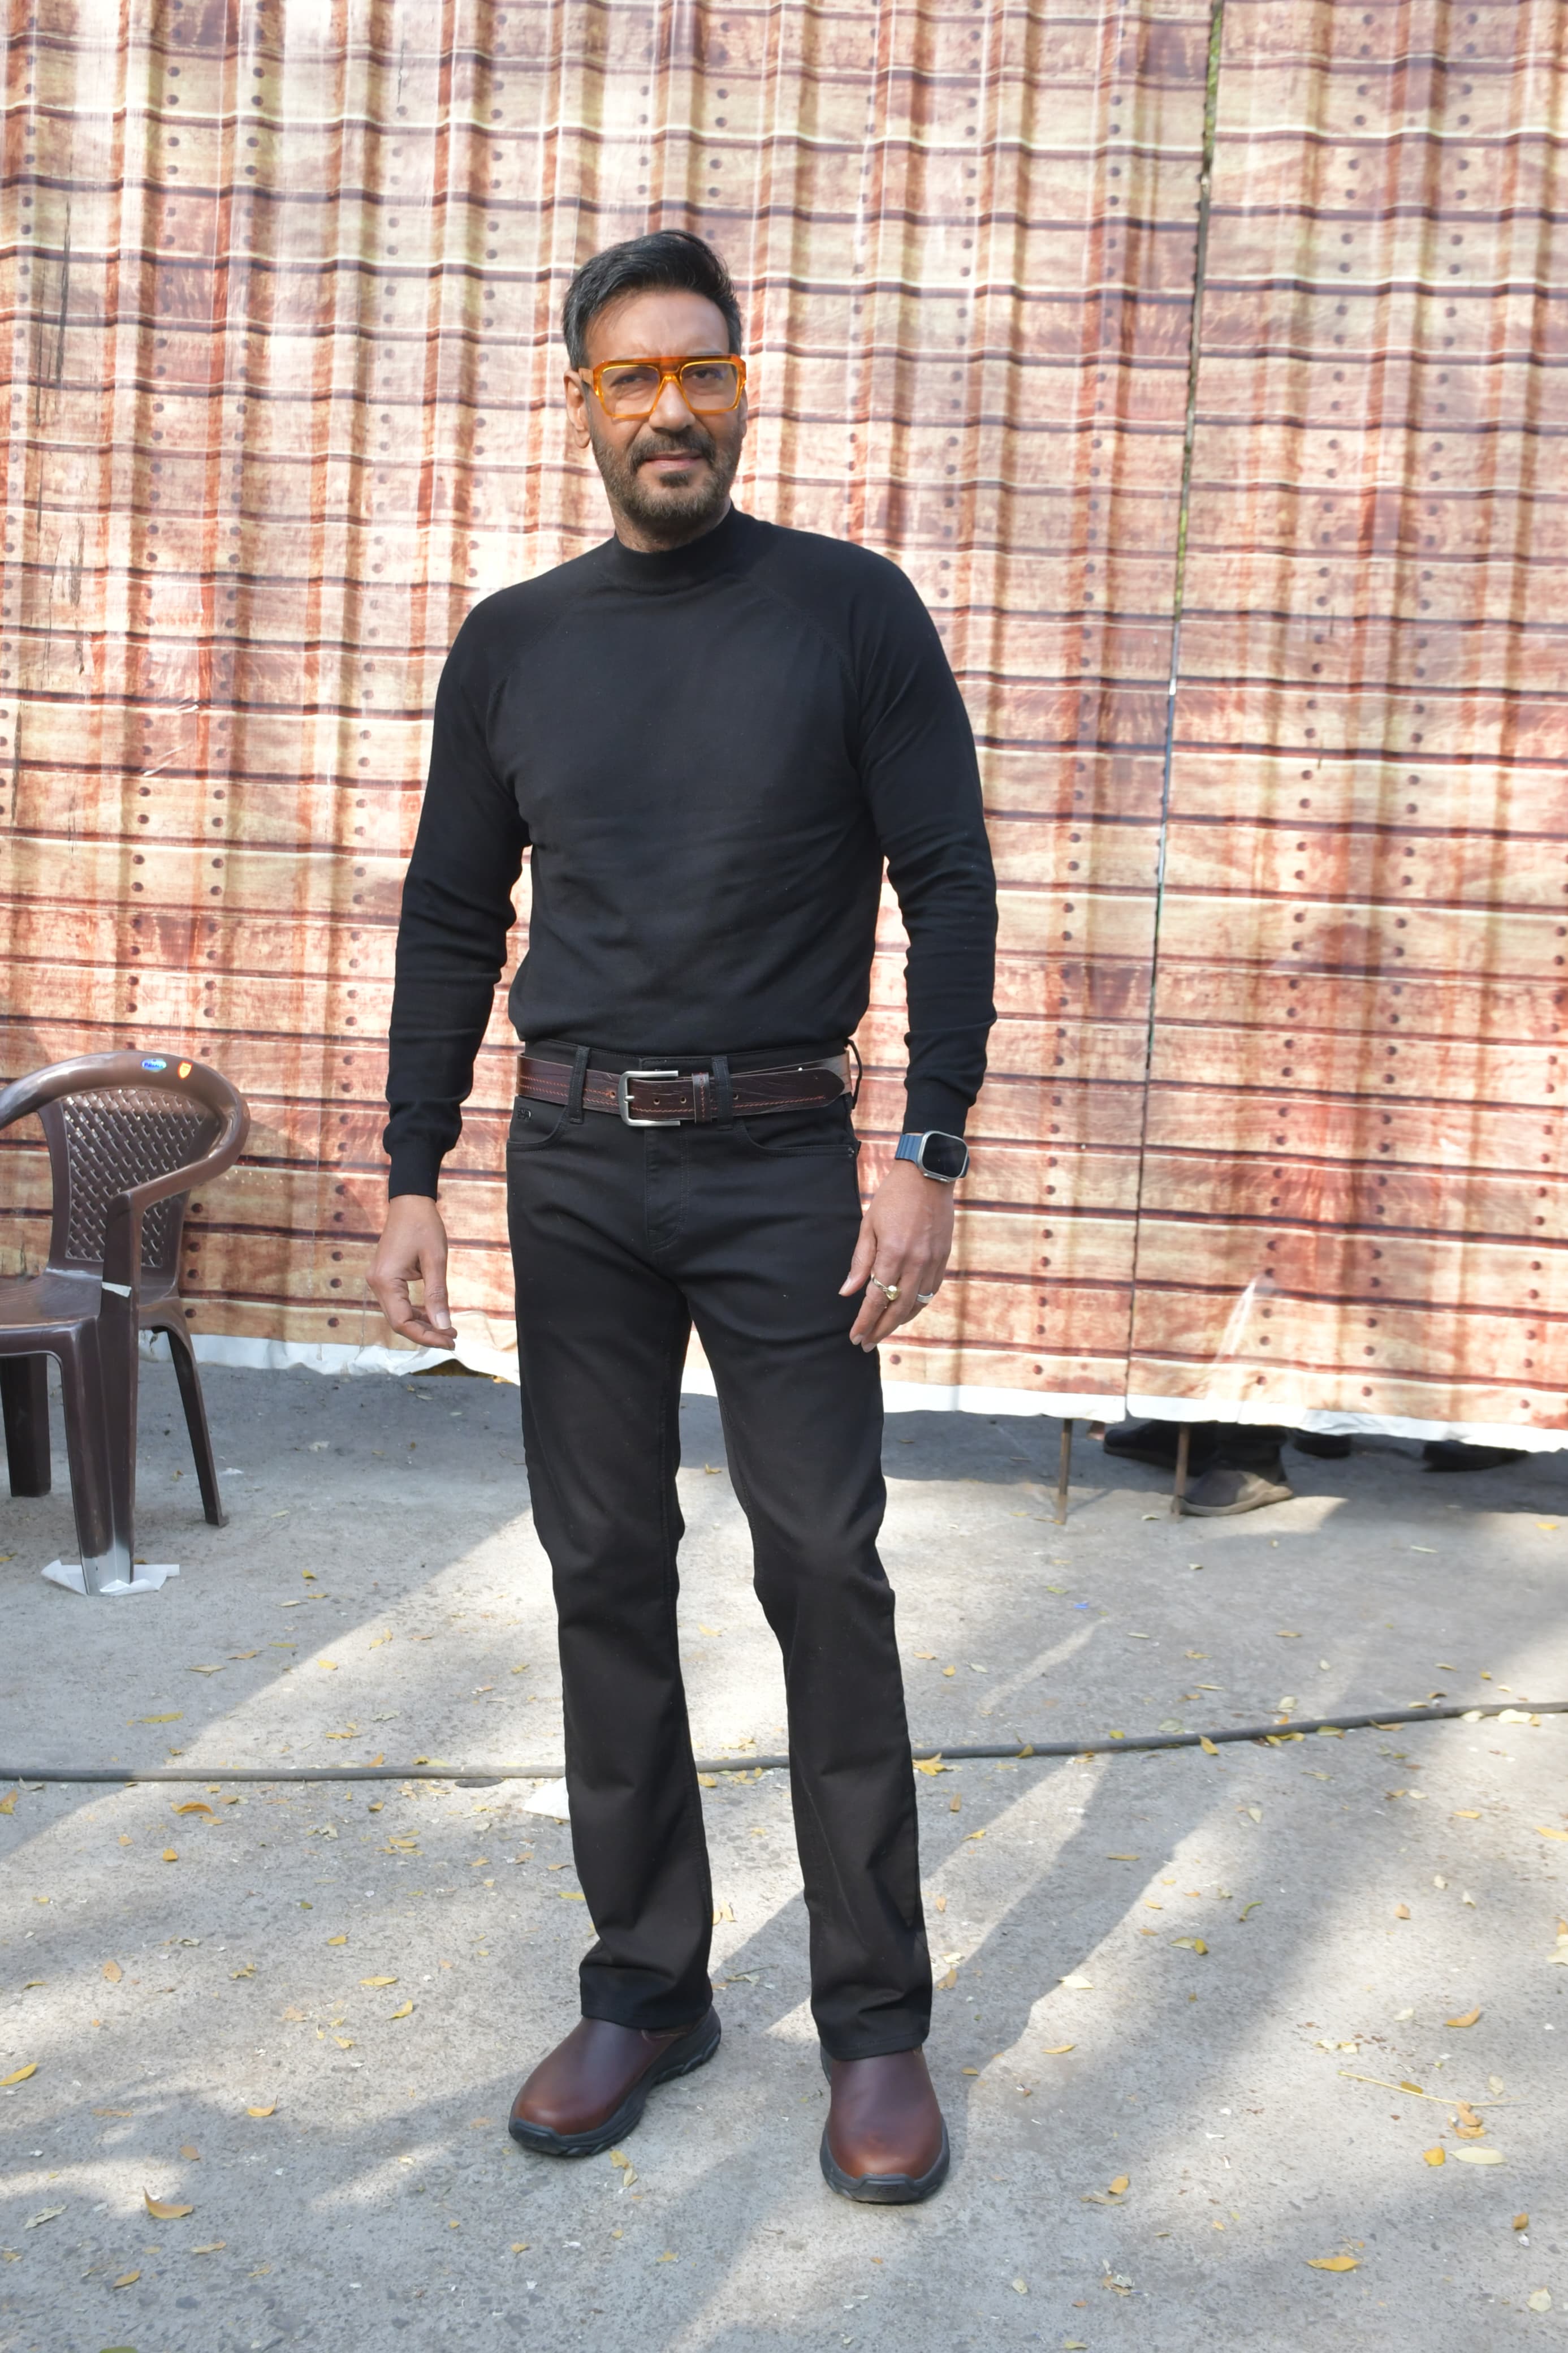 Ajay Devgn looked stylish as he got clicked in a black outfit